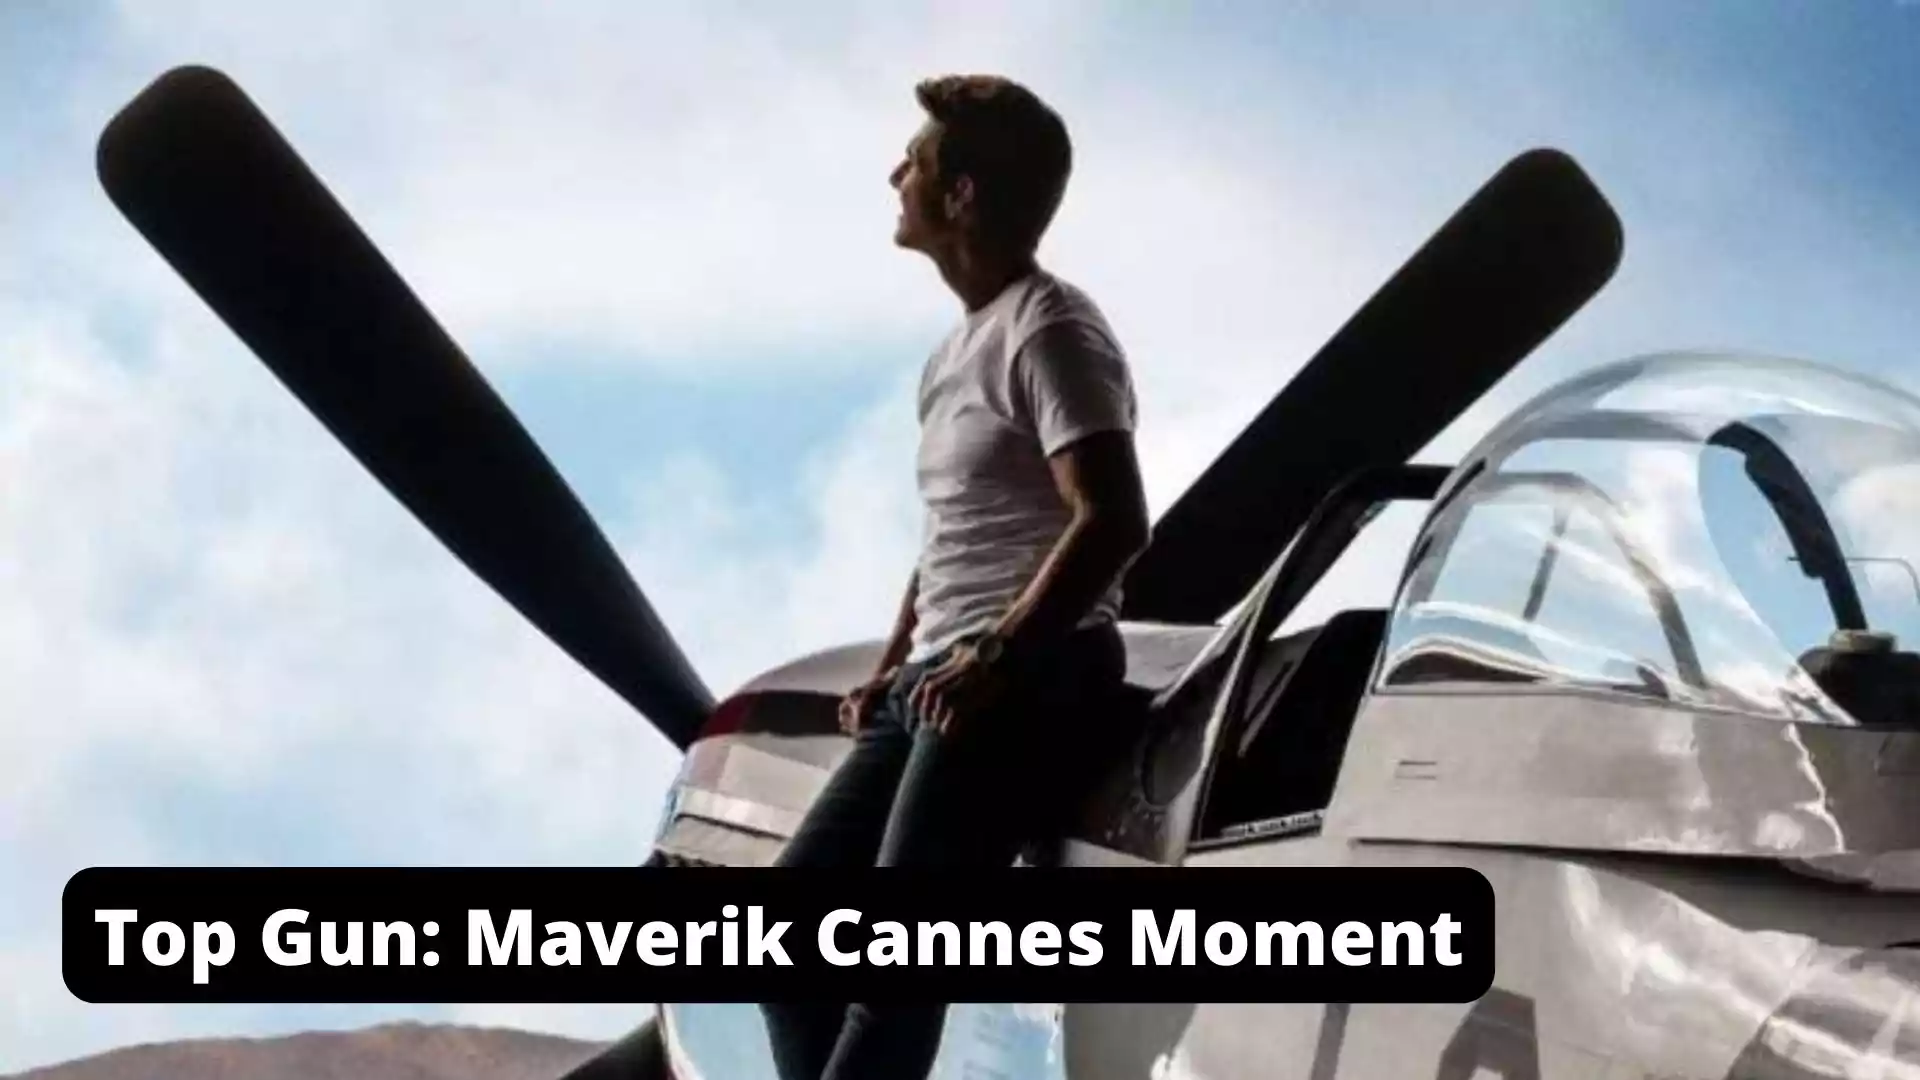 5-Minute Standing Ovation for Top Gun Maverick at Cannes Premiere